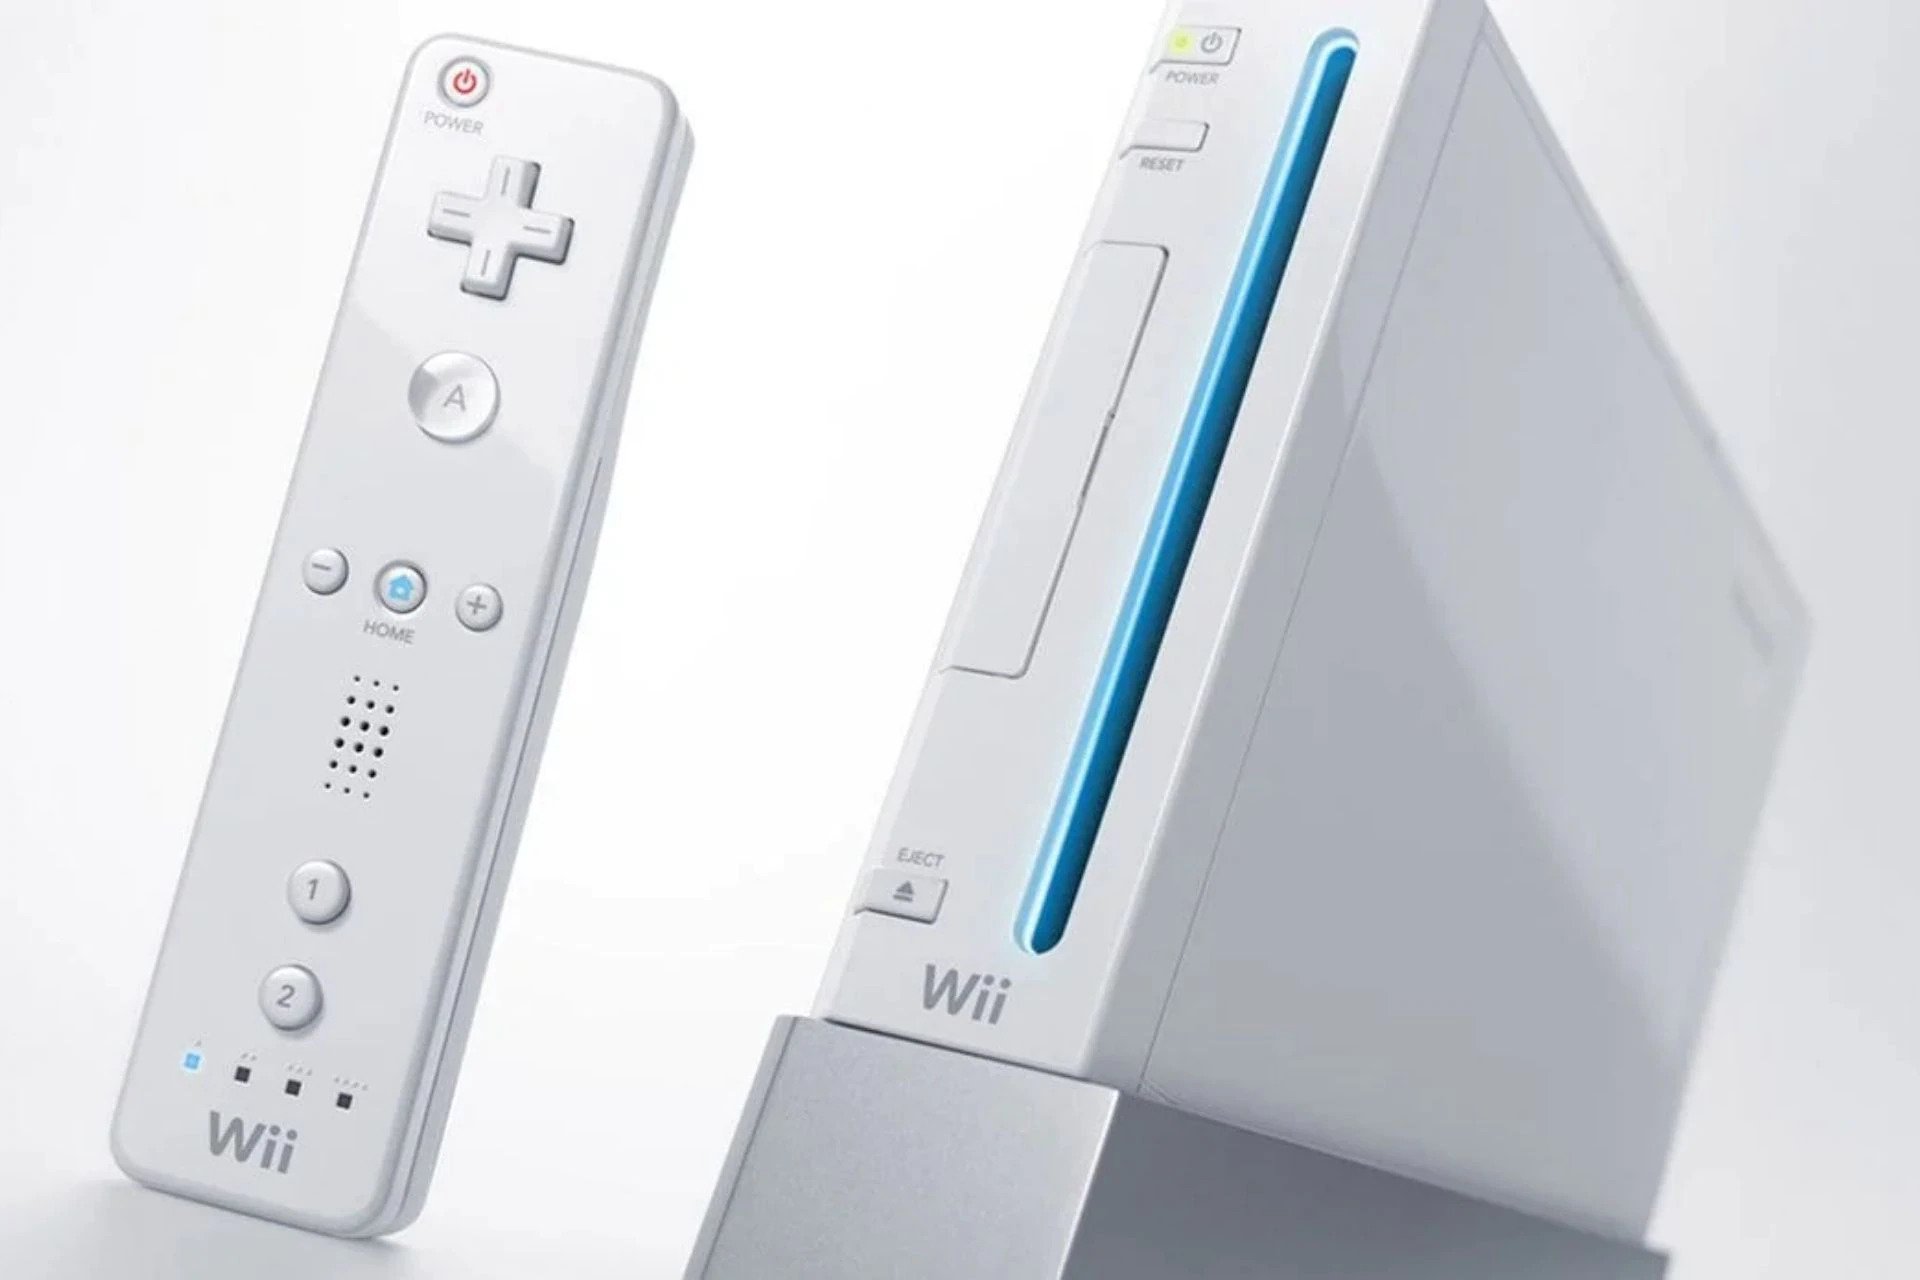 wii console deals